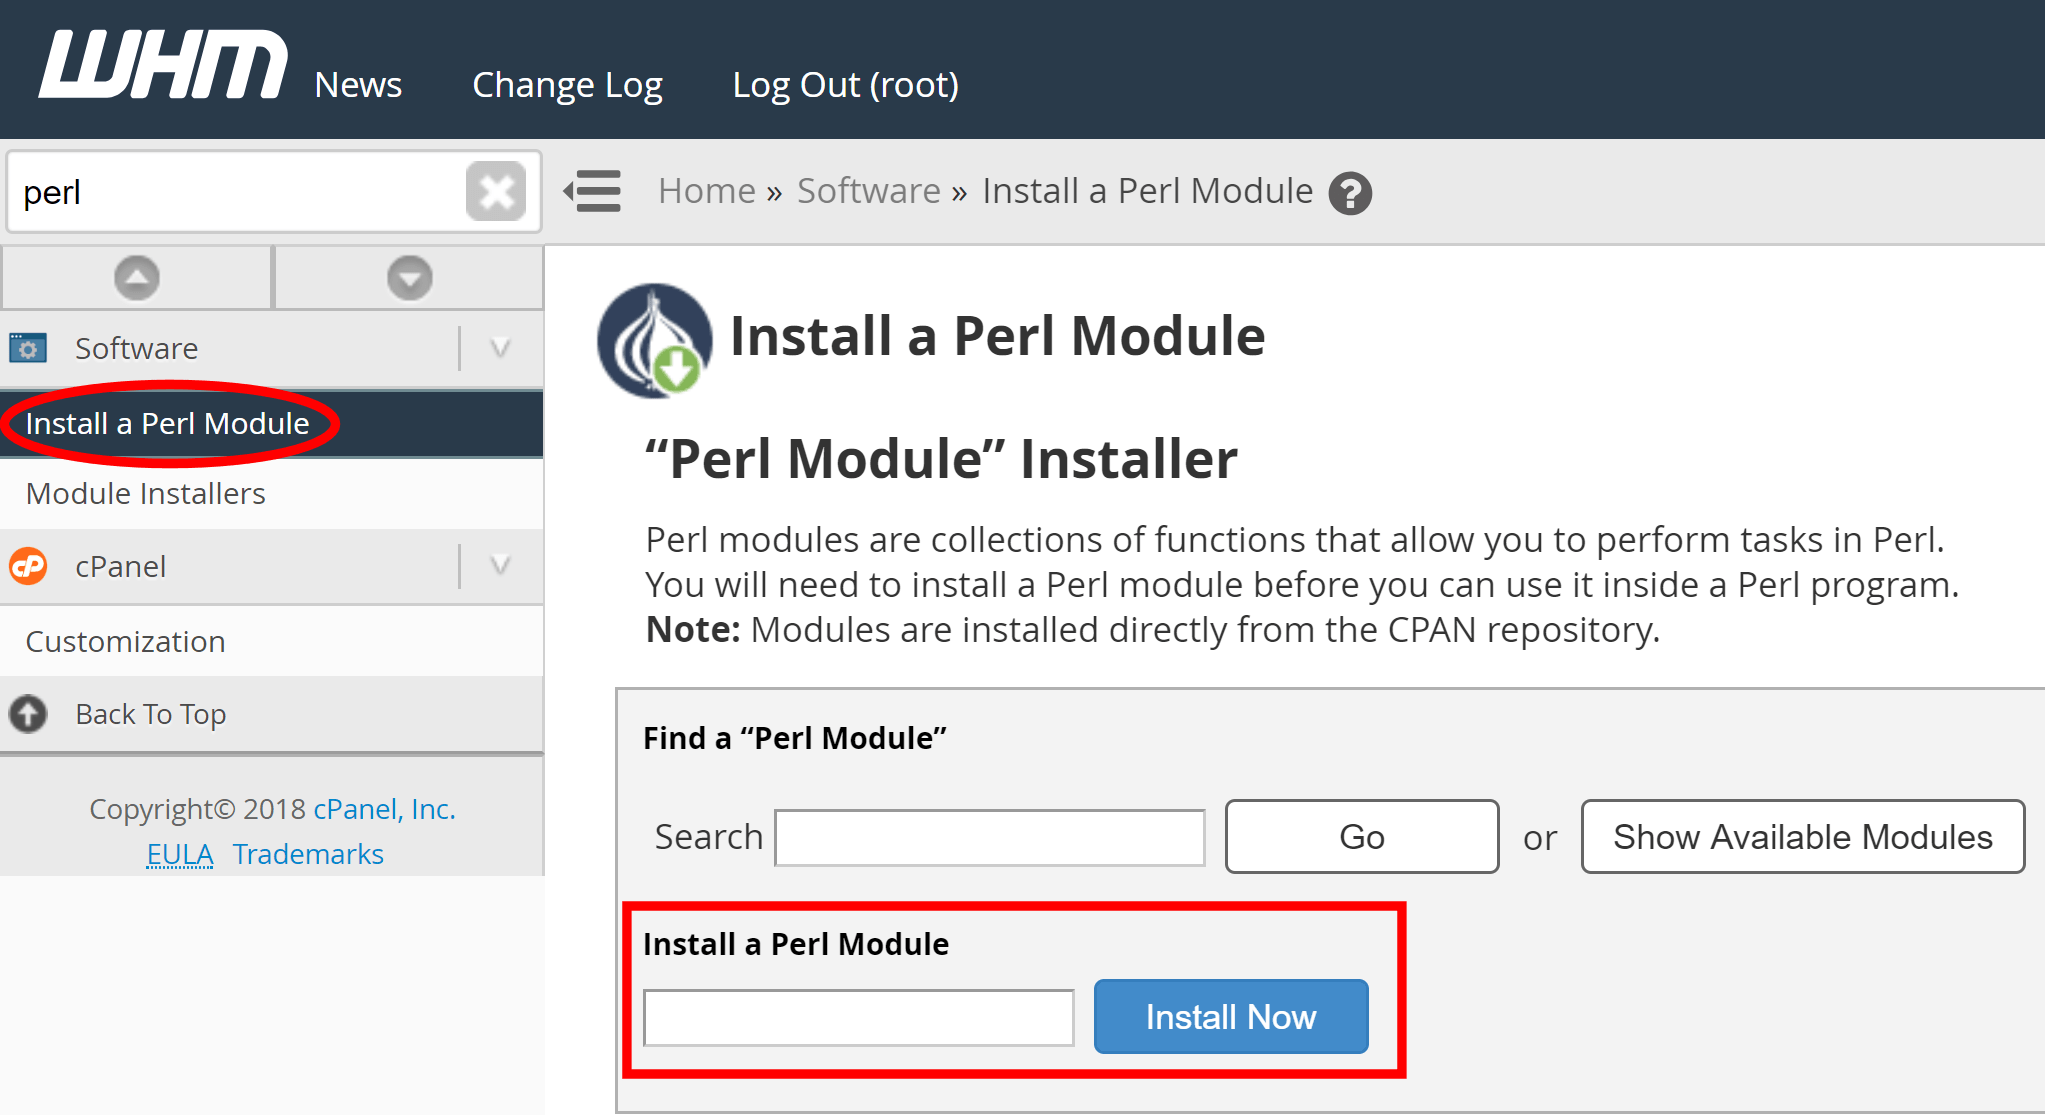 How to install a Perl module in WHM